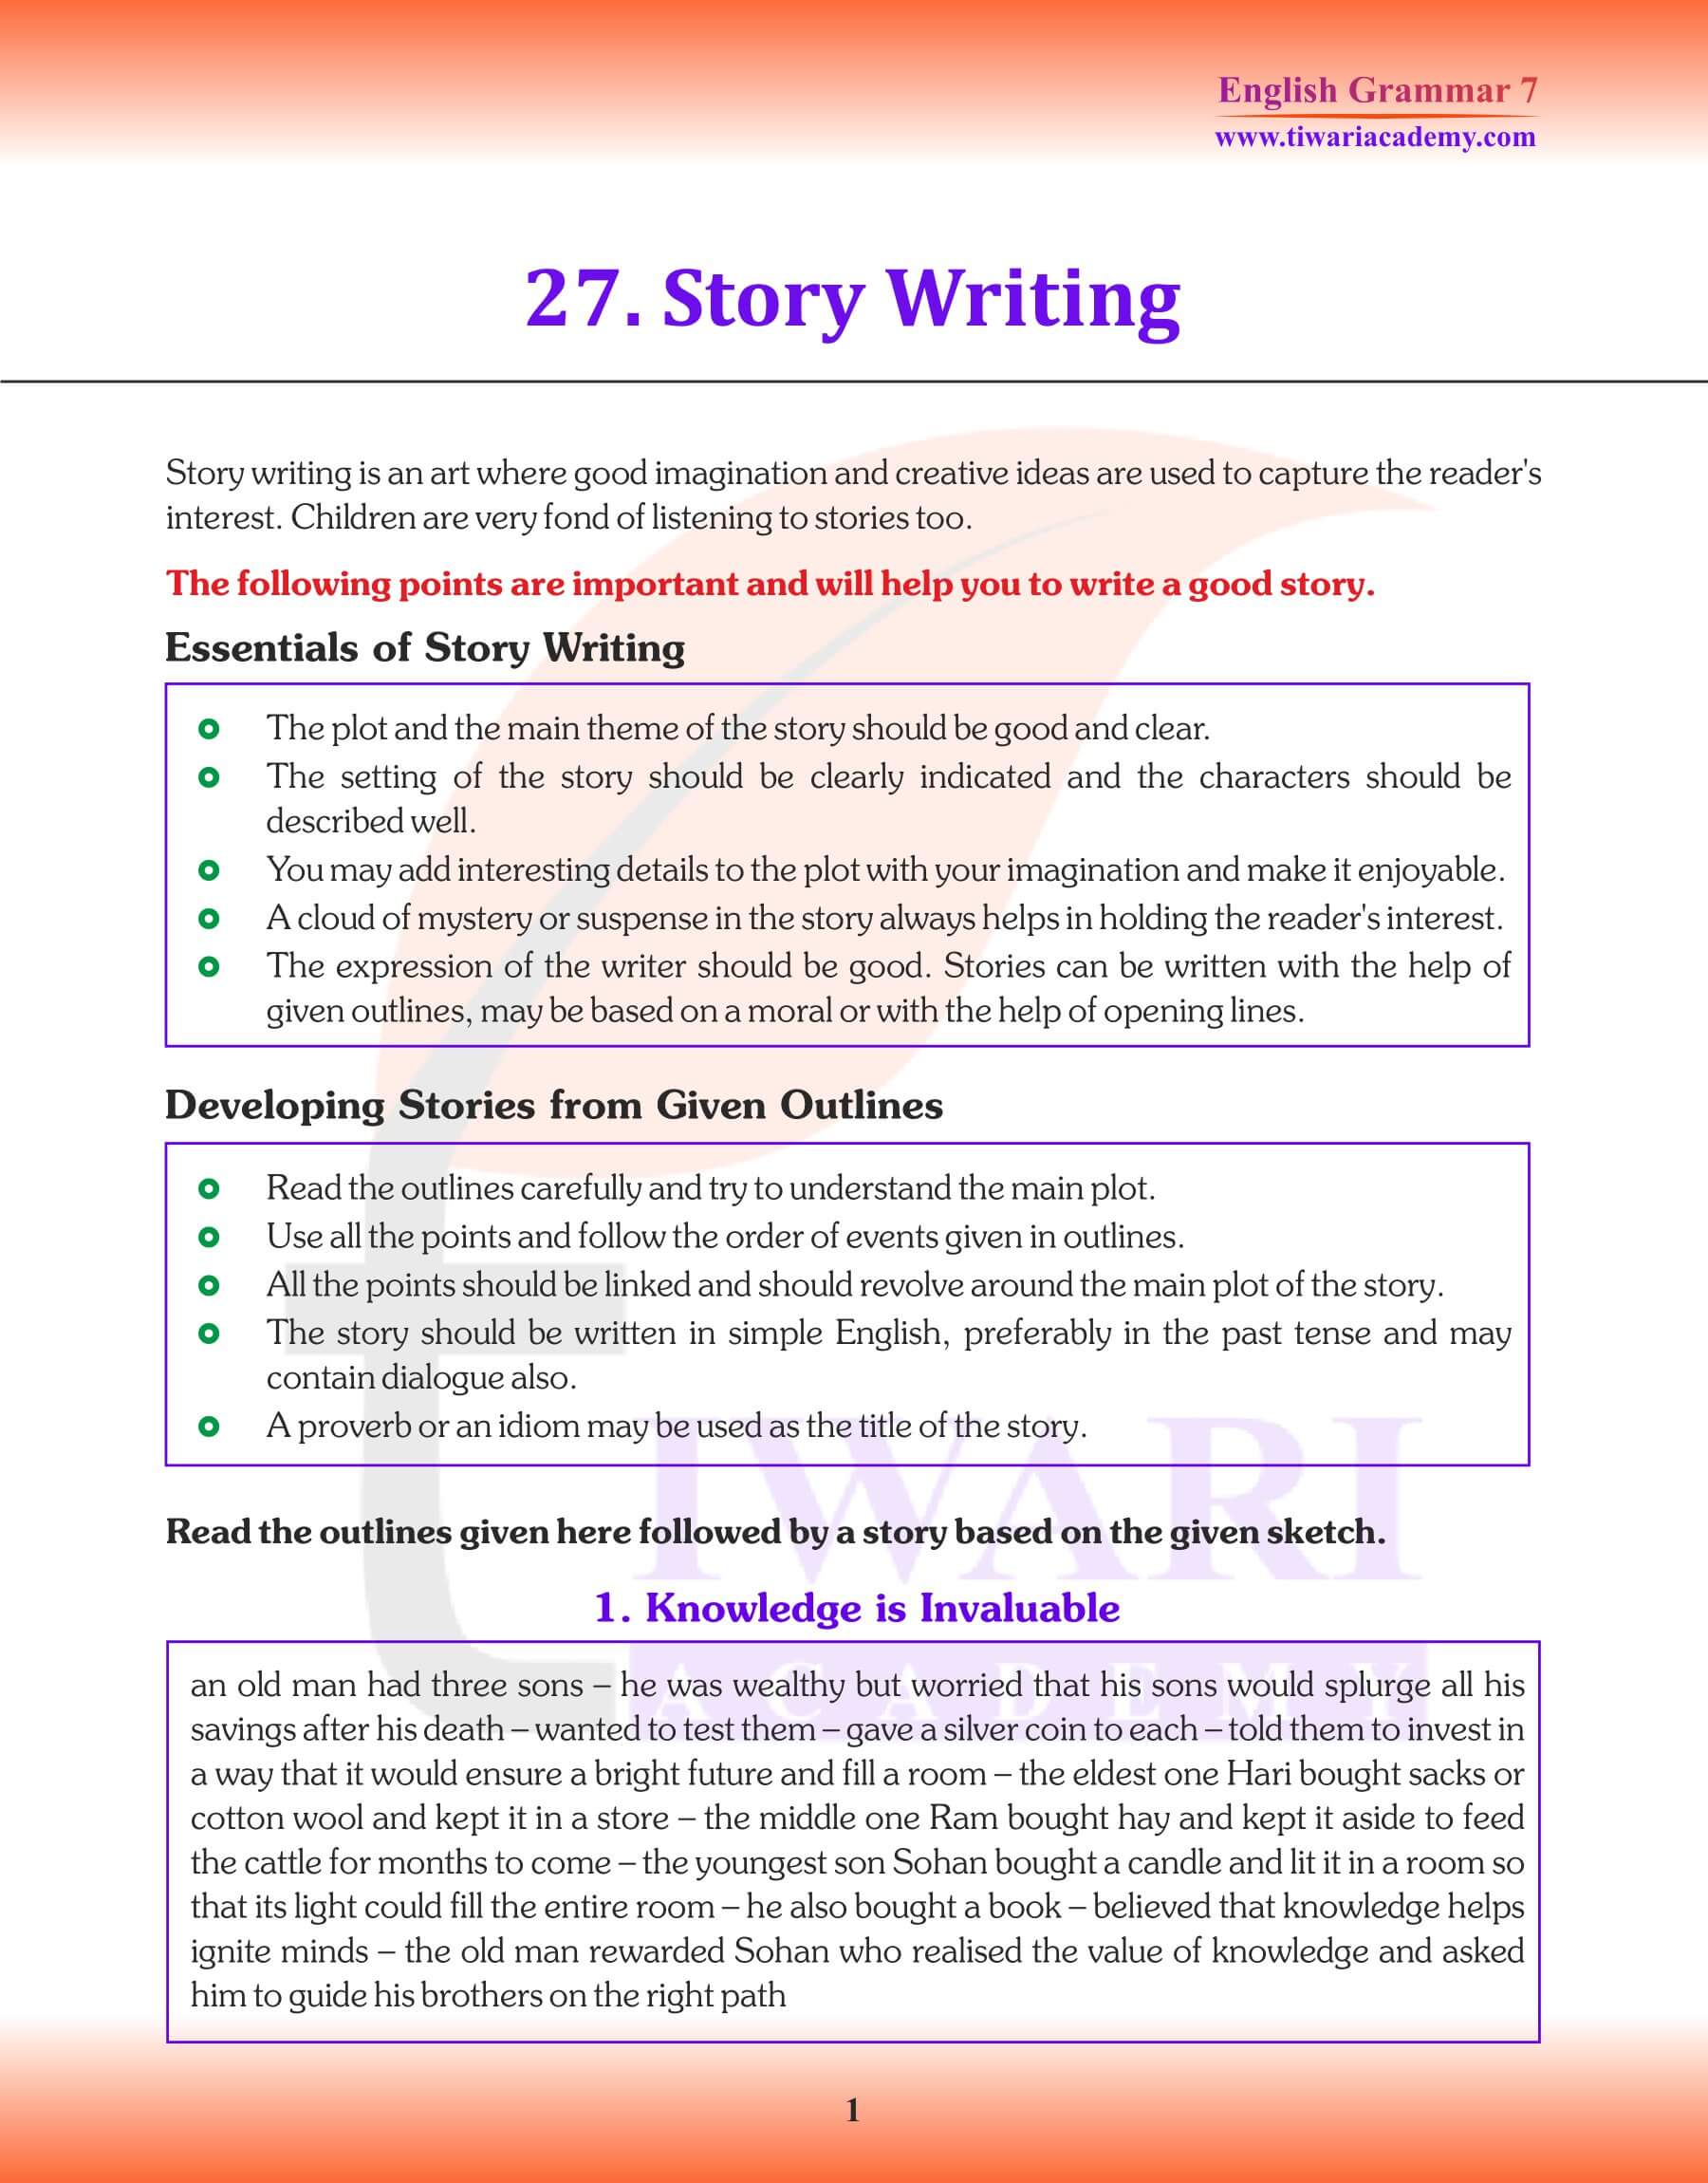 How to learn Story Writing